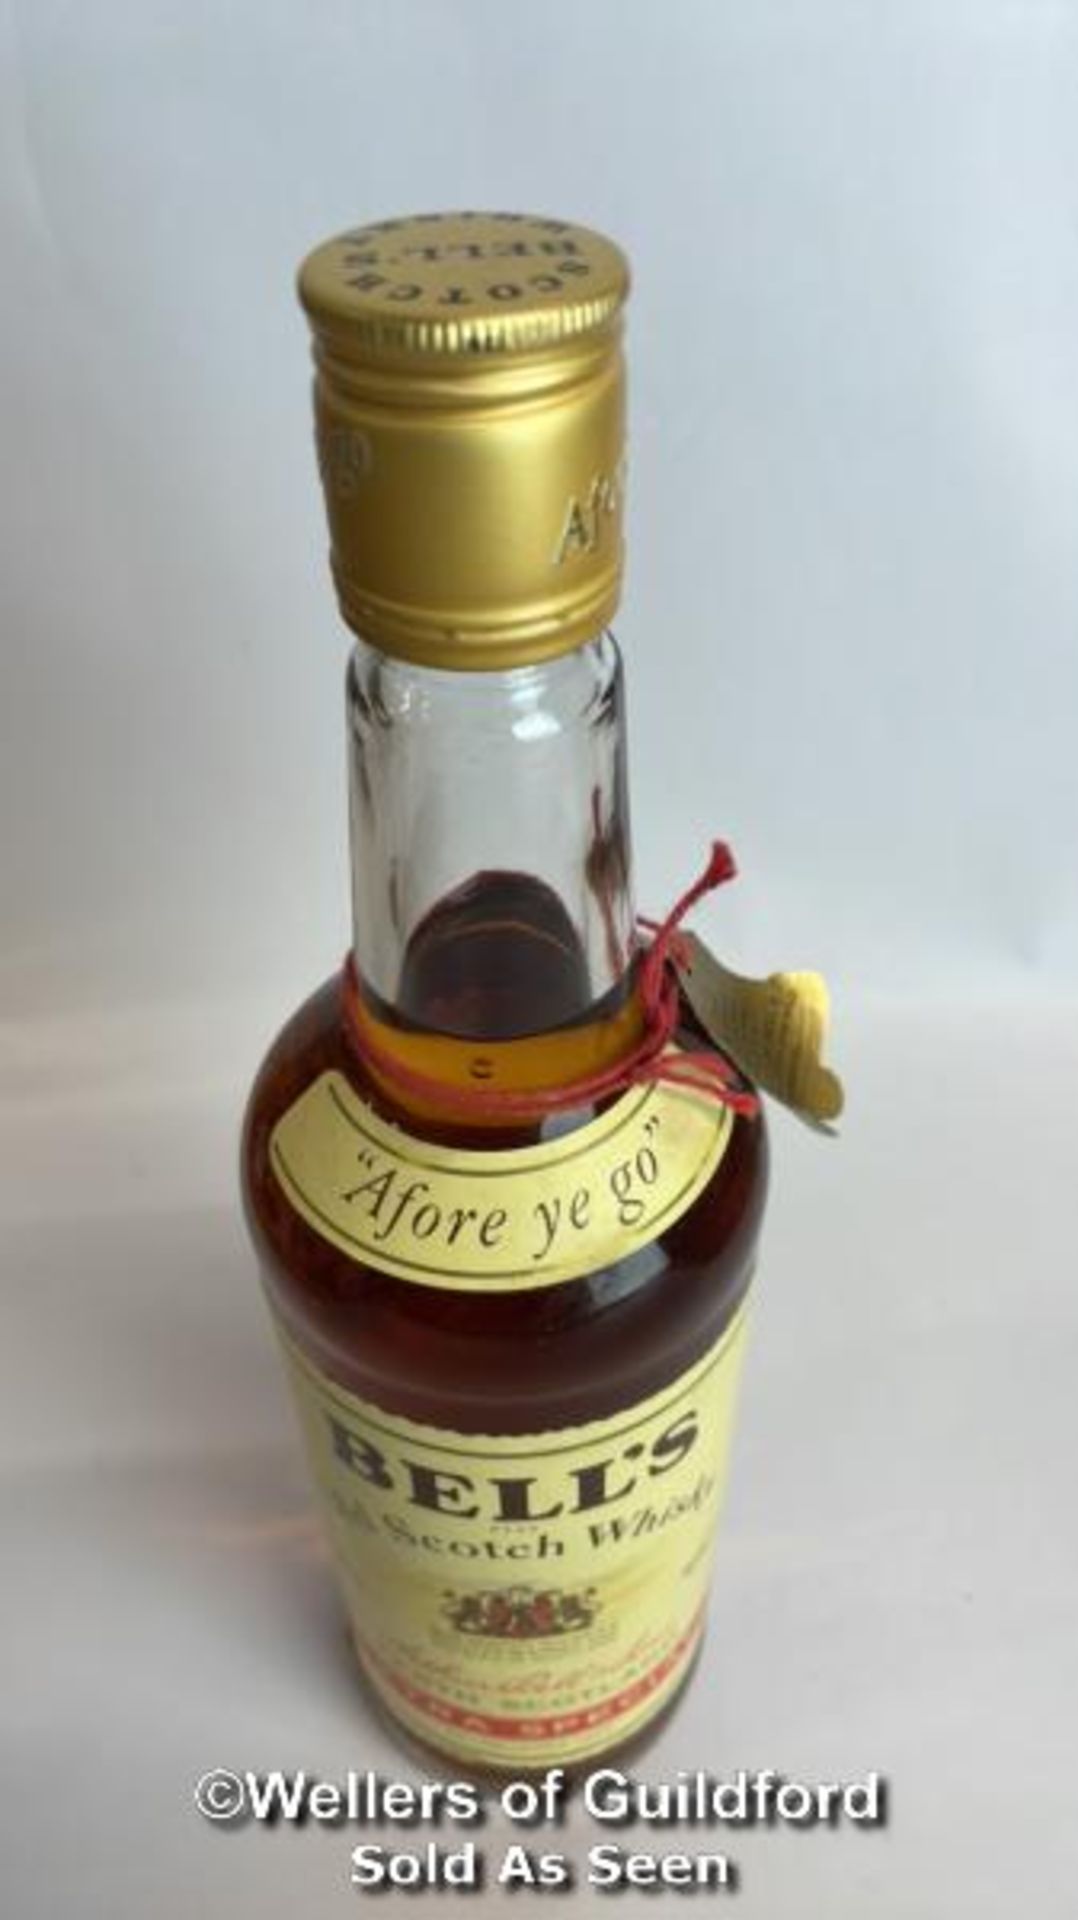 Bell's Extra Special Old Scotch Whisky, "Afore Ye Go", 75cl, 43% vol, In original box / Please see - Bild 12 aus 12